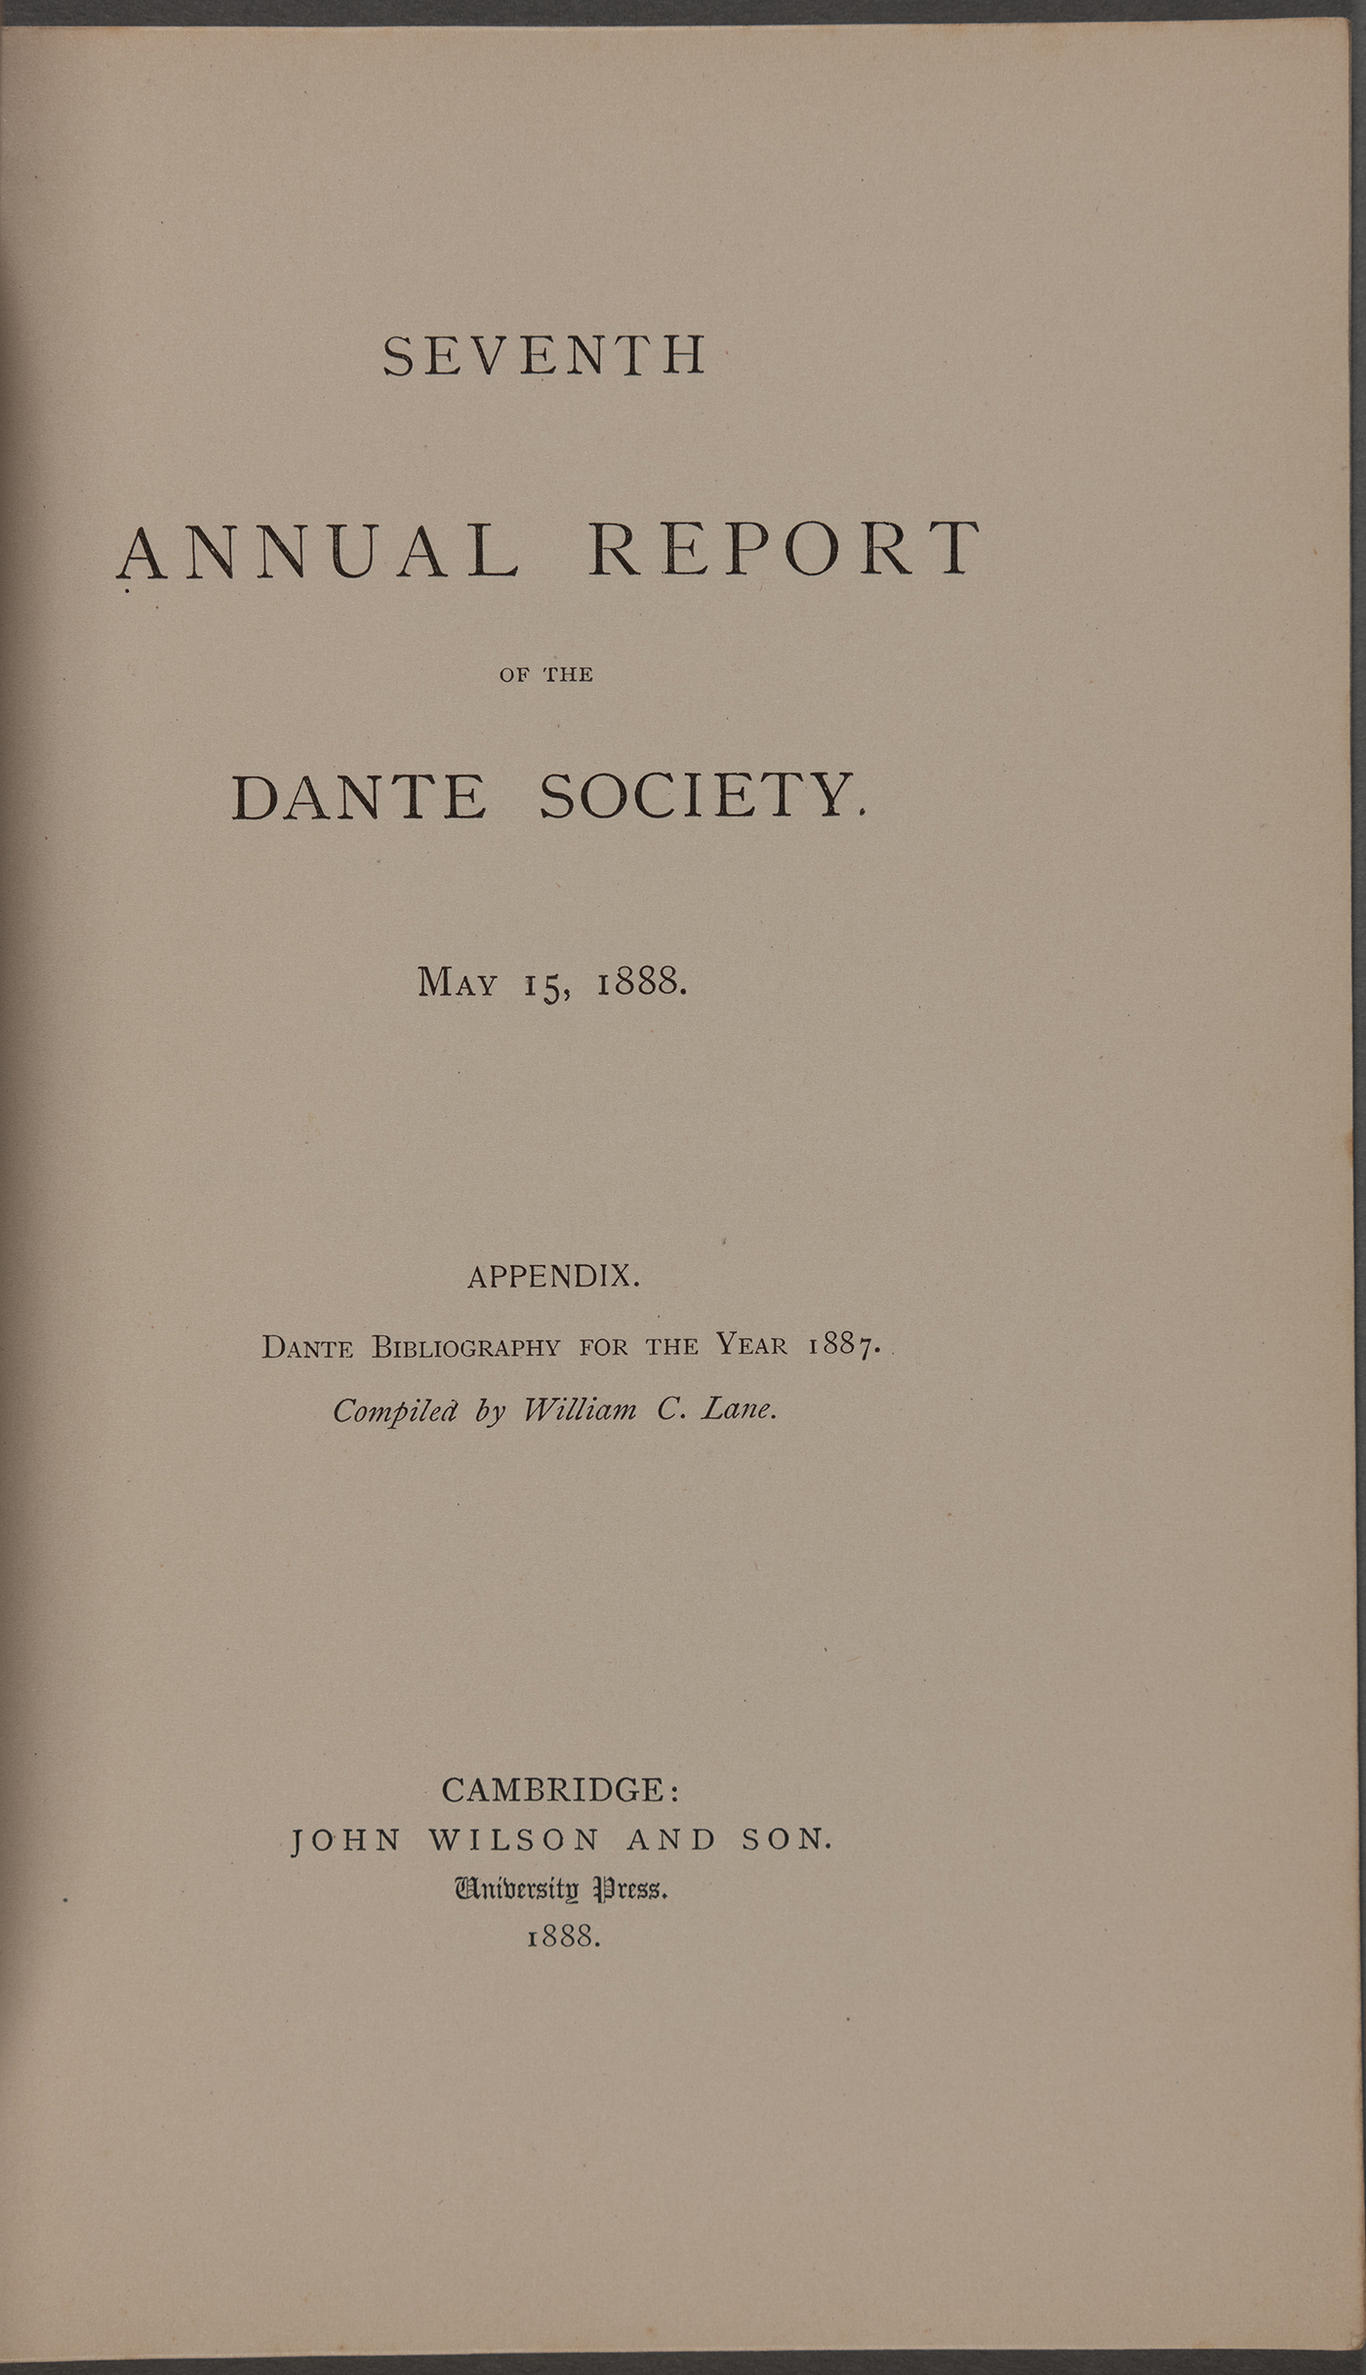 The cover of the seventh annual report of the Dante Society